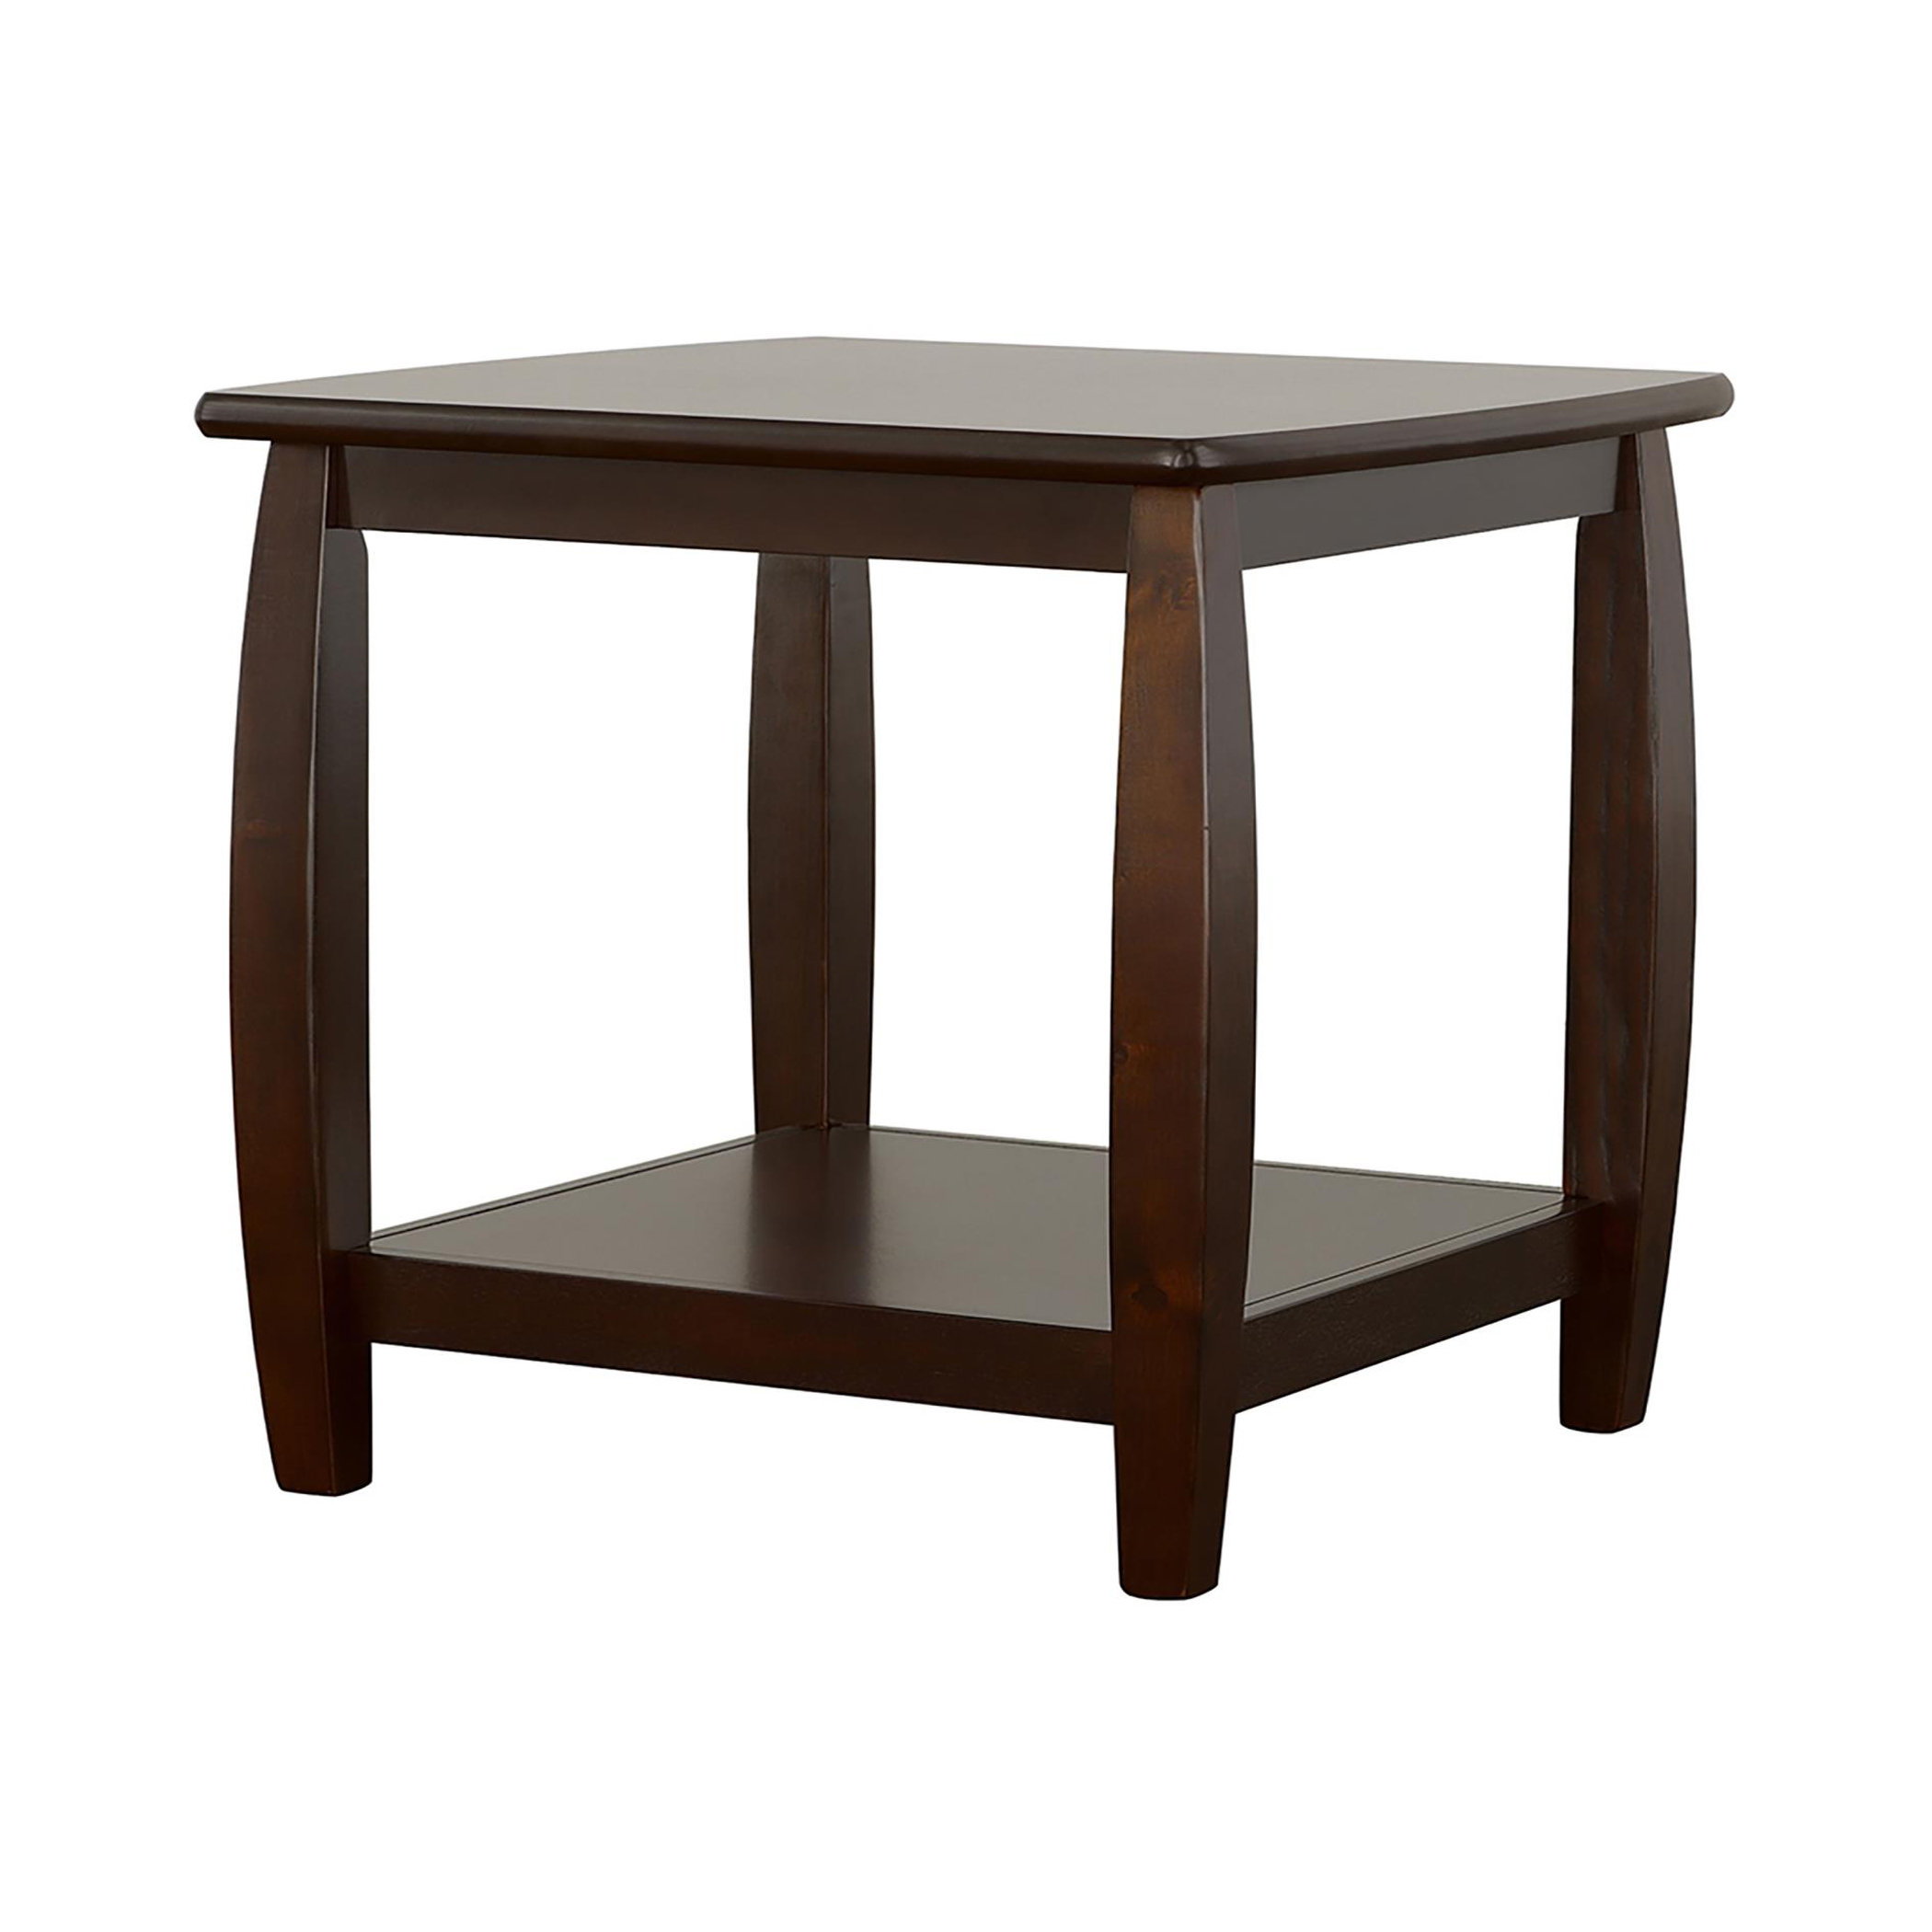 Jalanda Tall End Table with 2 USB Ports, 2 Power Outlets, and 2-Tier Storage Shelves 17 Stories Color: Dark Walnut